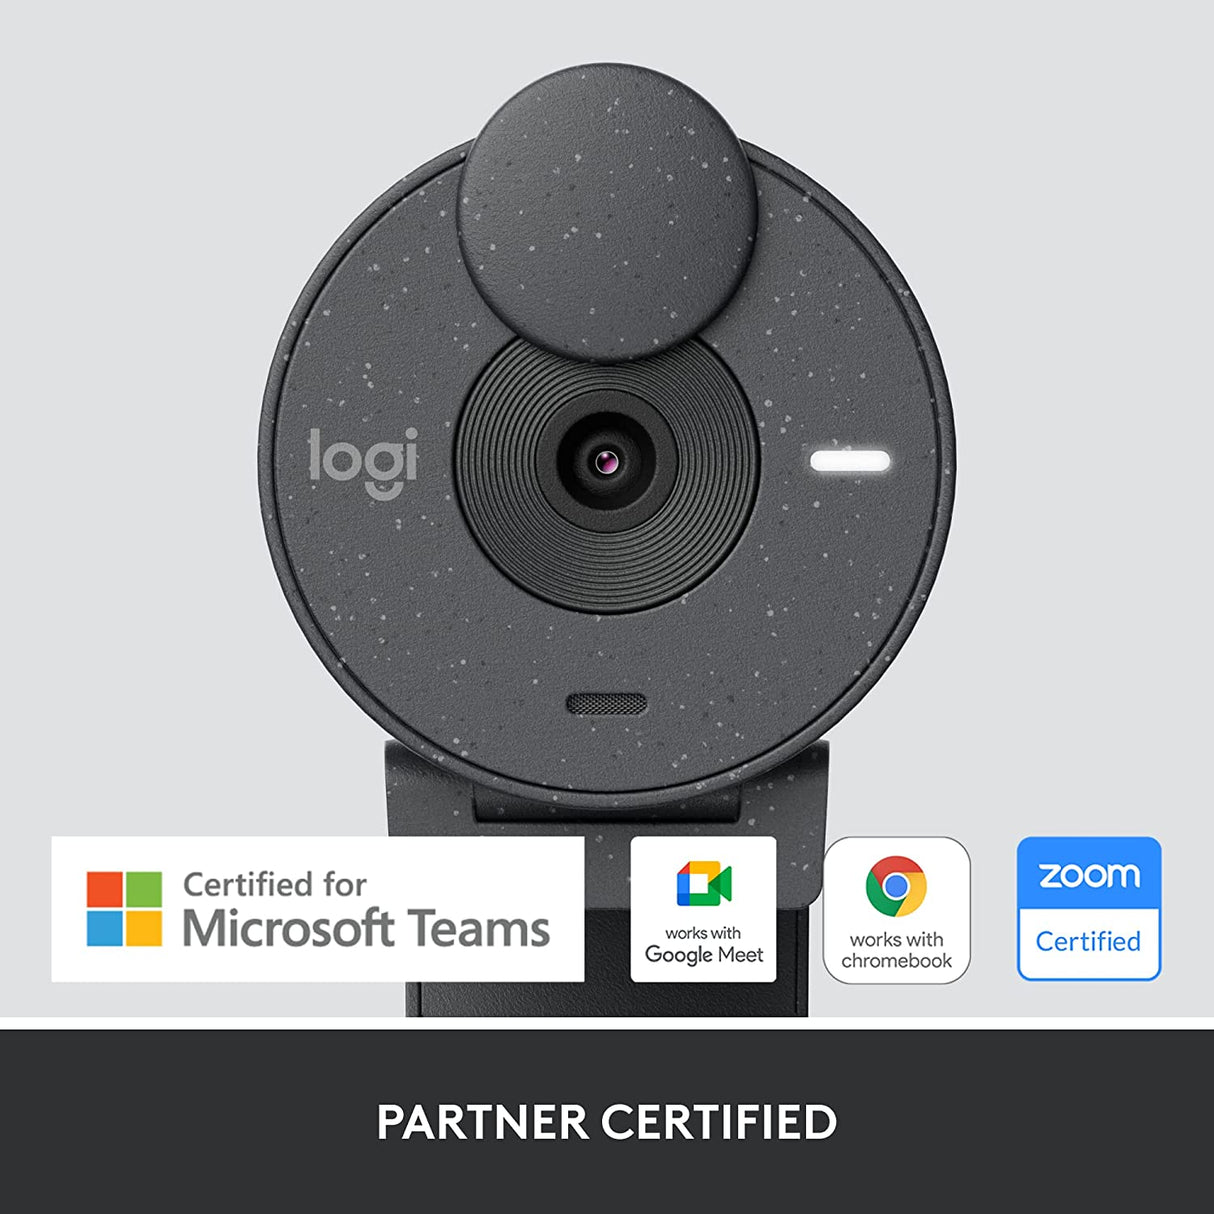 Logitech Brio 4K Webcam, Ultra 4K HD Video Calling, Noise-Canceling mic, HD  Auto Light Correction, Wide Field of View, Works with Microsoft Teams,  Zoom, Google Voice, PC/Mac/Laptop/Macbook/Tablet 